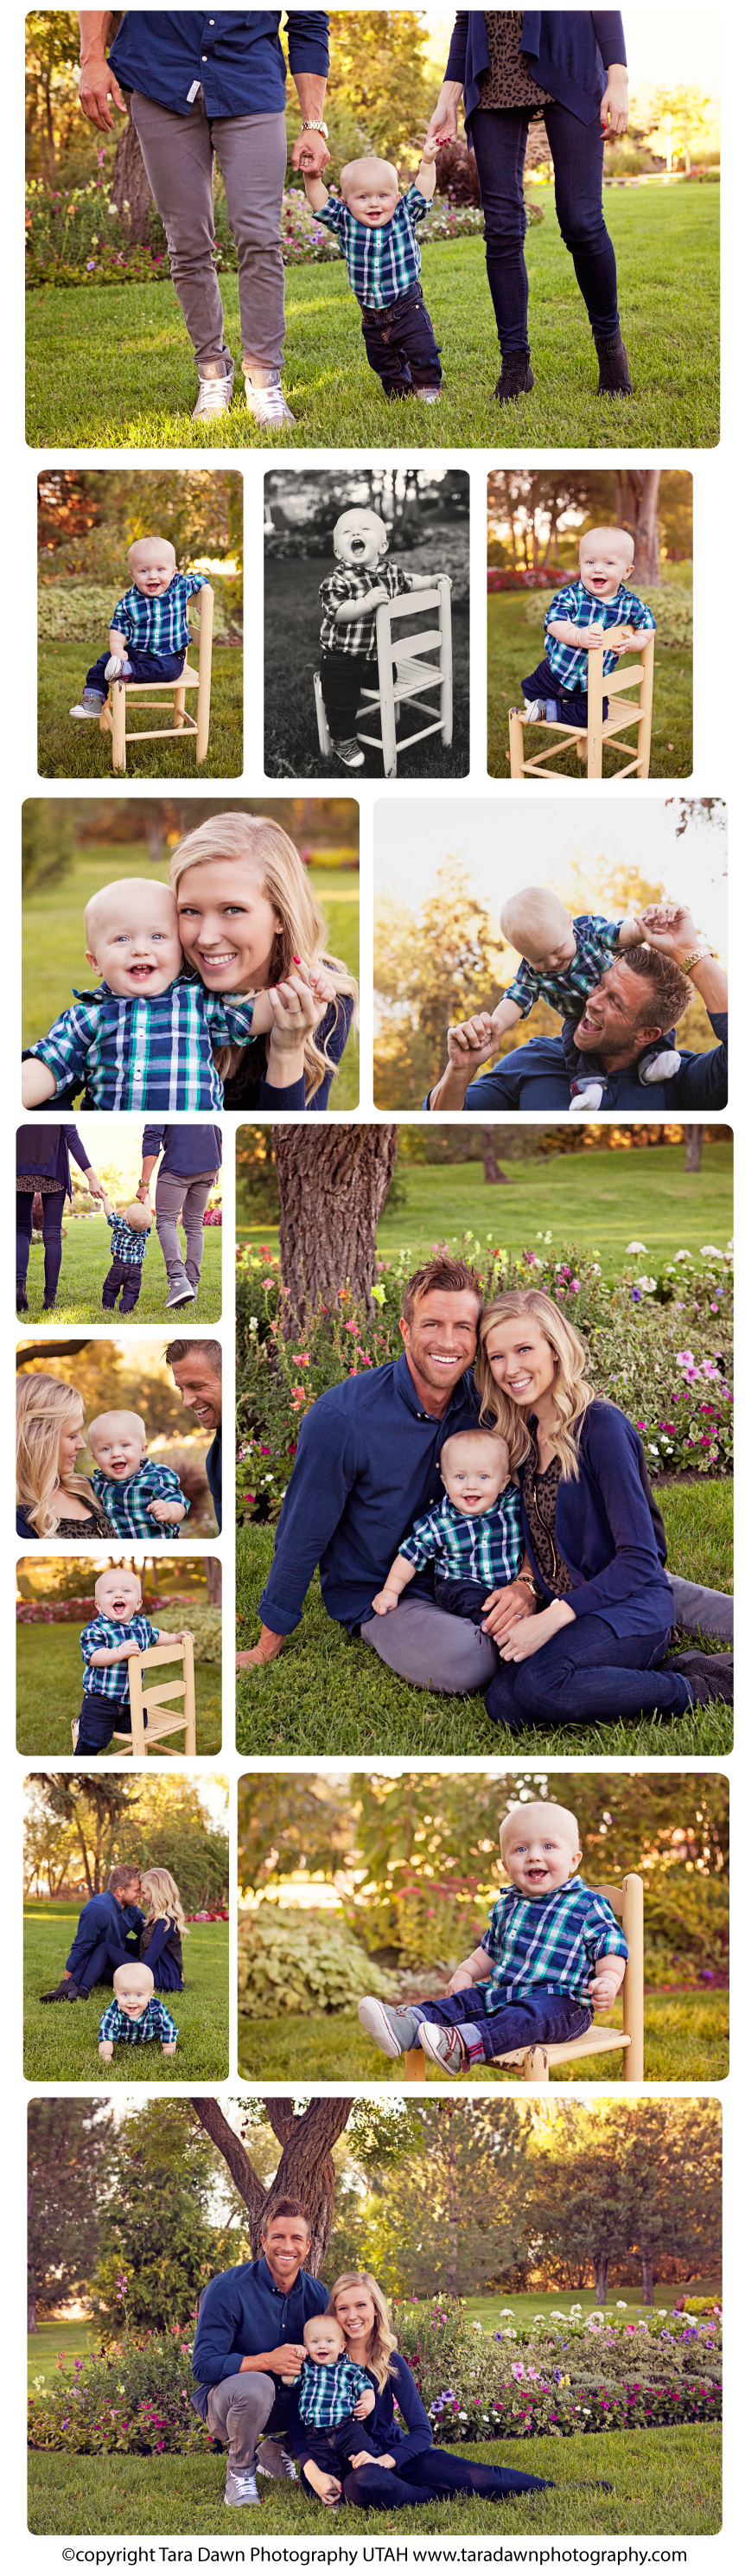 utah_family_photography_outdoor